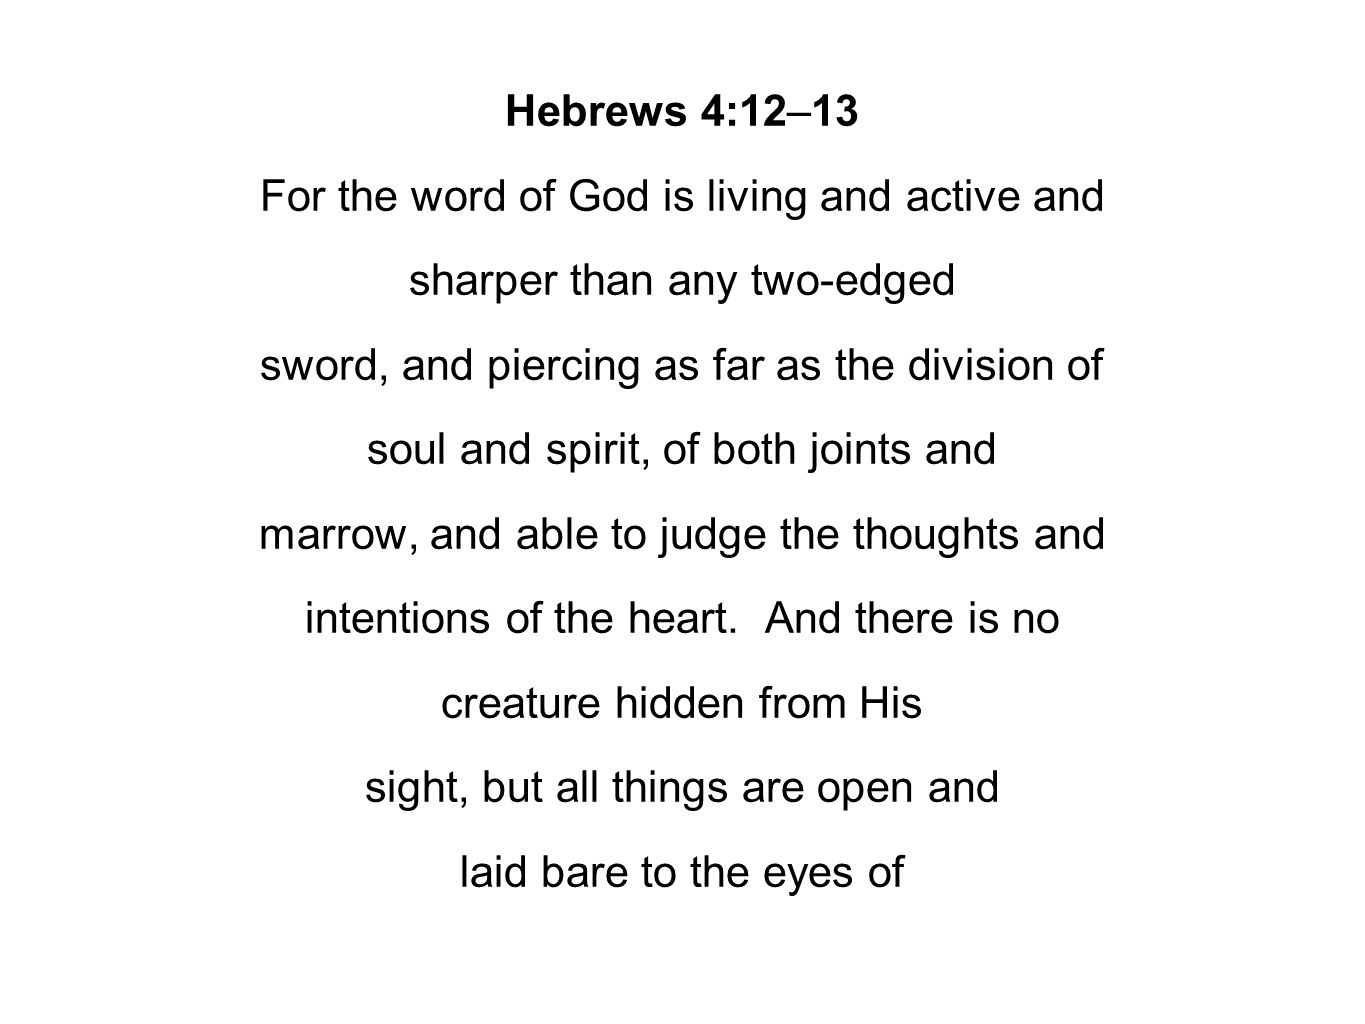 Hebrews 4:12–13 For the word of God is living and active and sharper than any two-edged sword, and piercing as far as the division of soul and spirit, of both joints and marrow, and able to judge the thoughts and intentions of the heart.